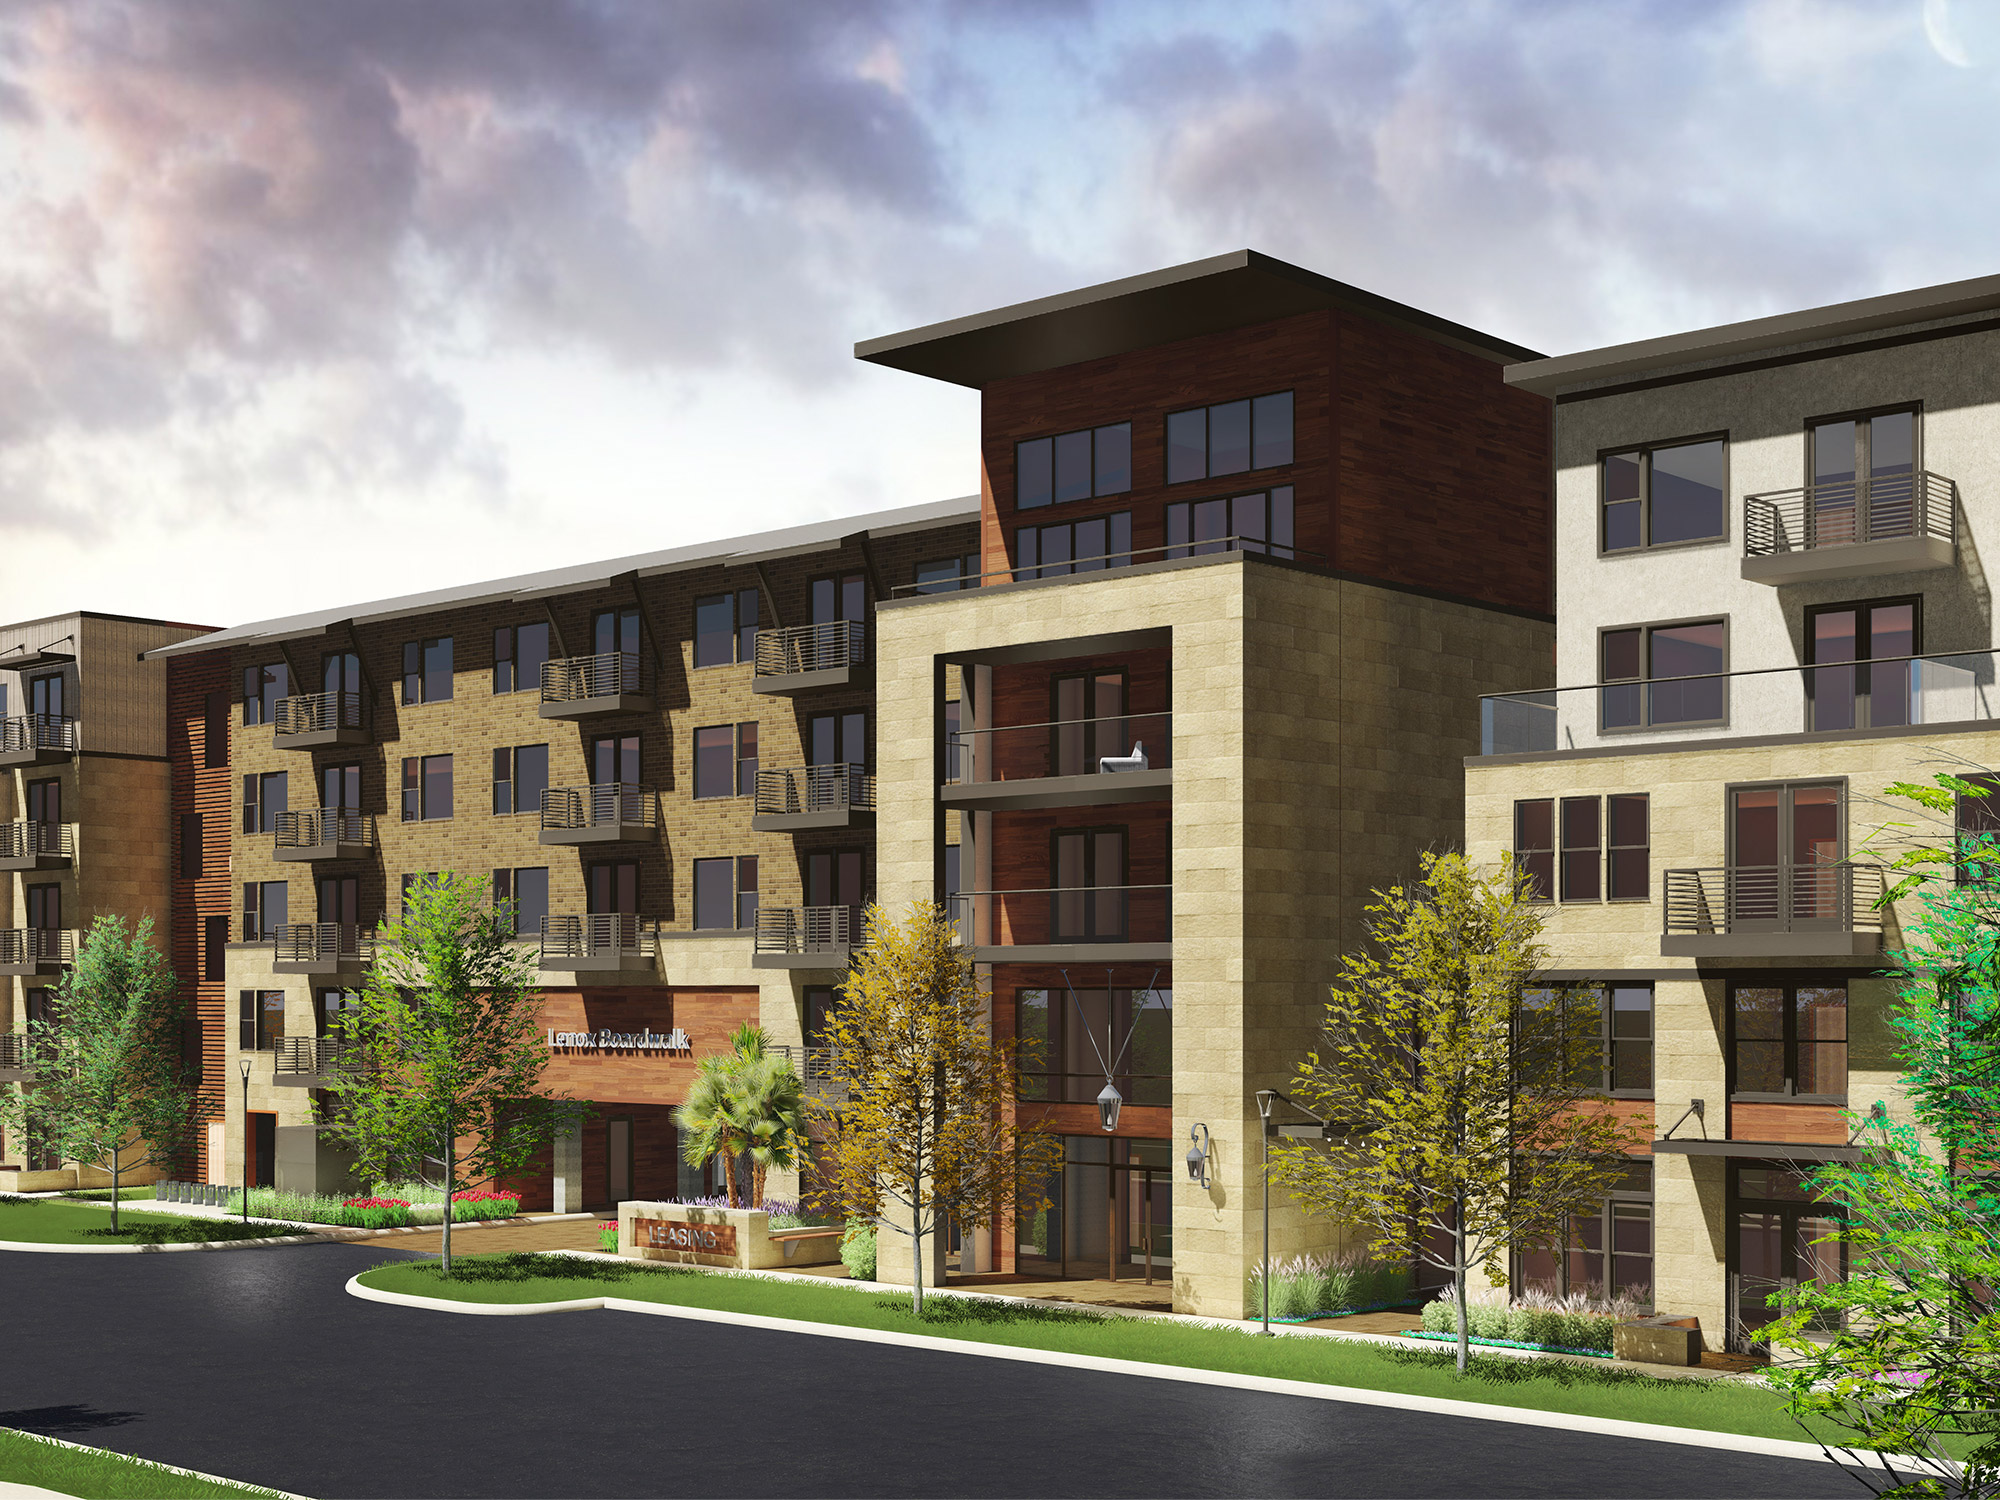 Rendering showing exterior of community in the daytime